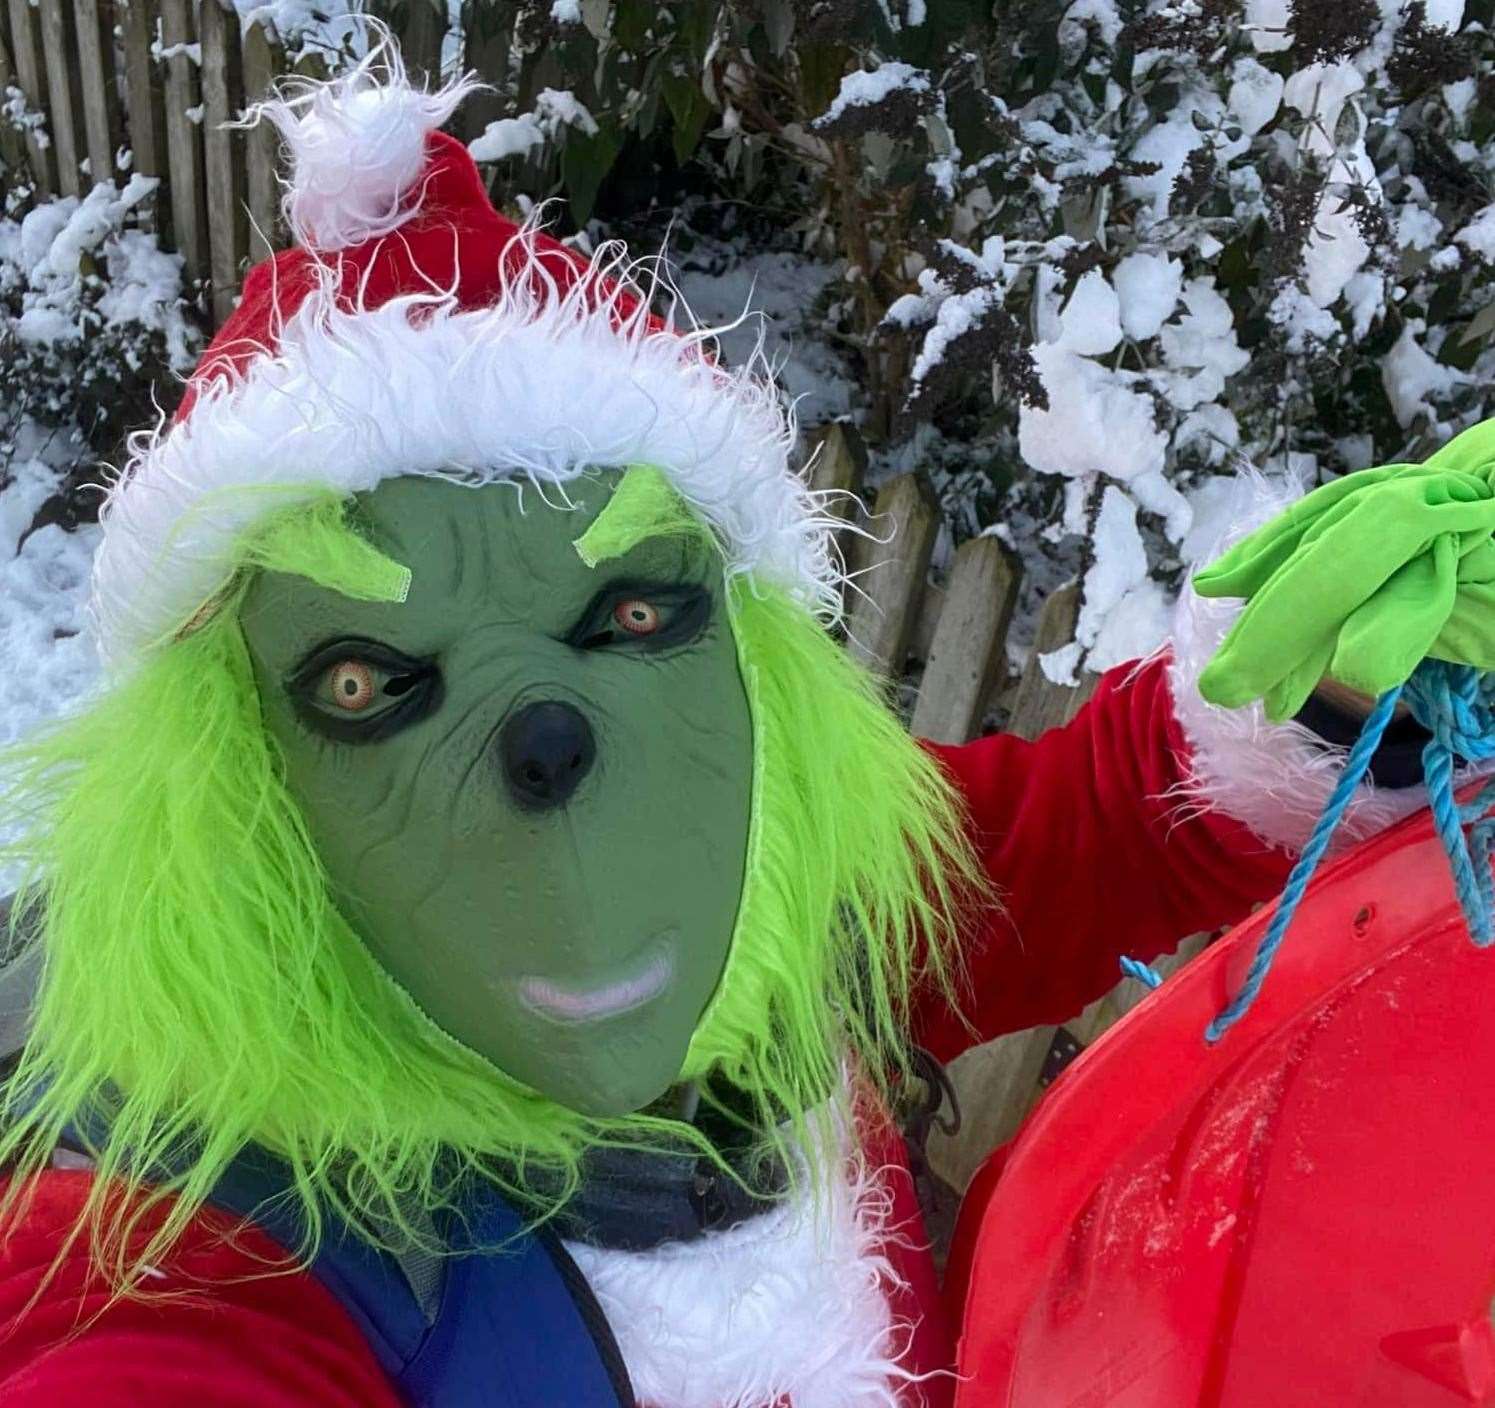 Daniel Wood dressed as the Grinch in 2022, to cheer up children on their way to school